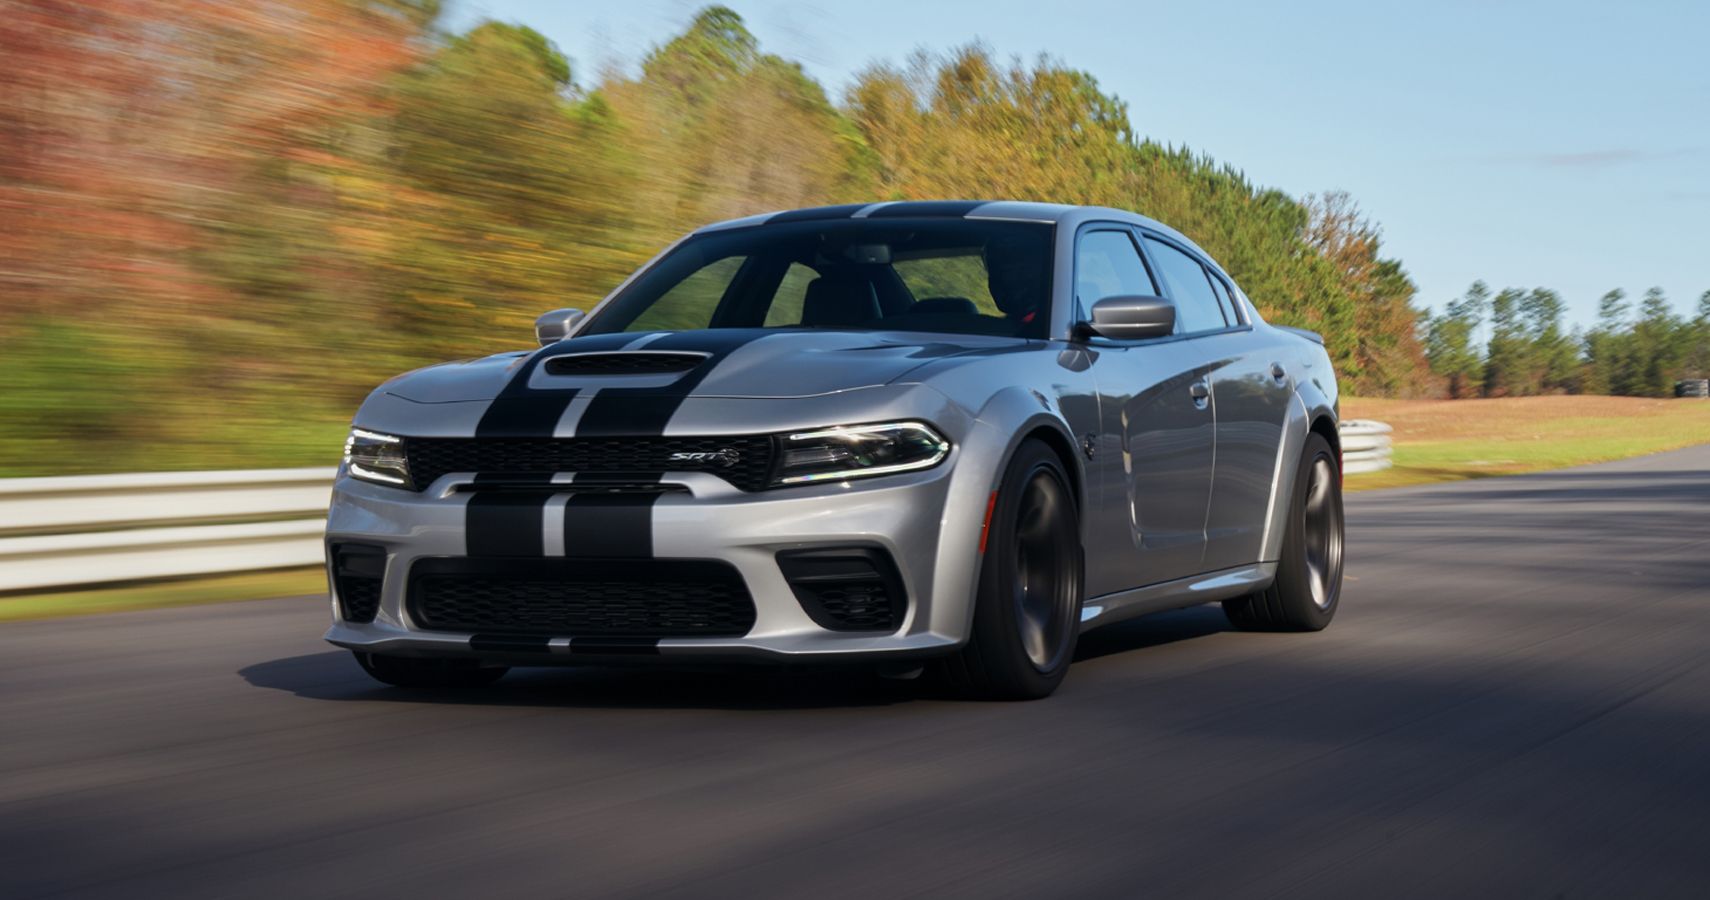 2023 Dodge Charger SRT Hellcat Redeye Most Powerful And Fastest Mass-Produced Sedan